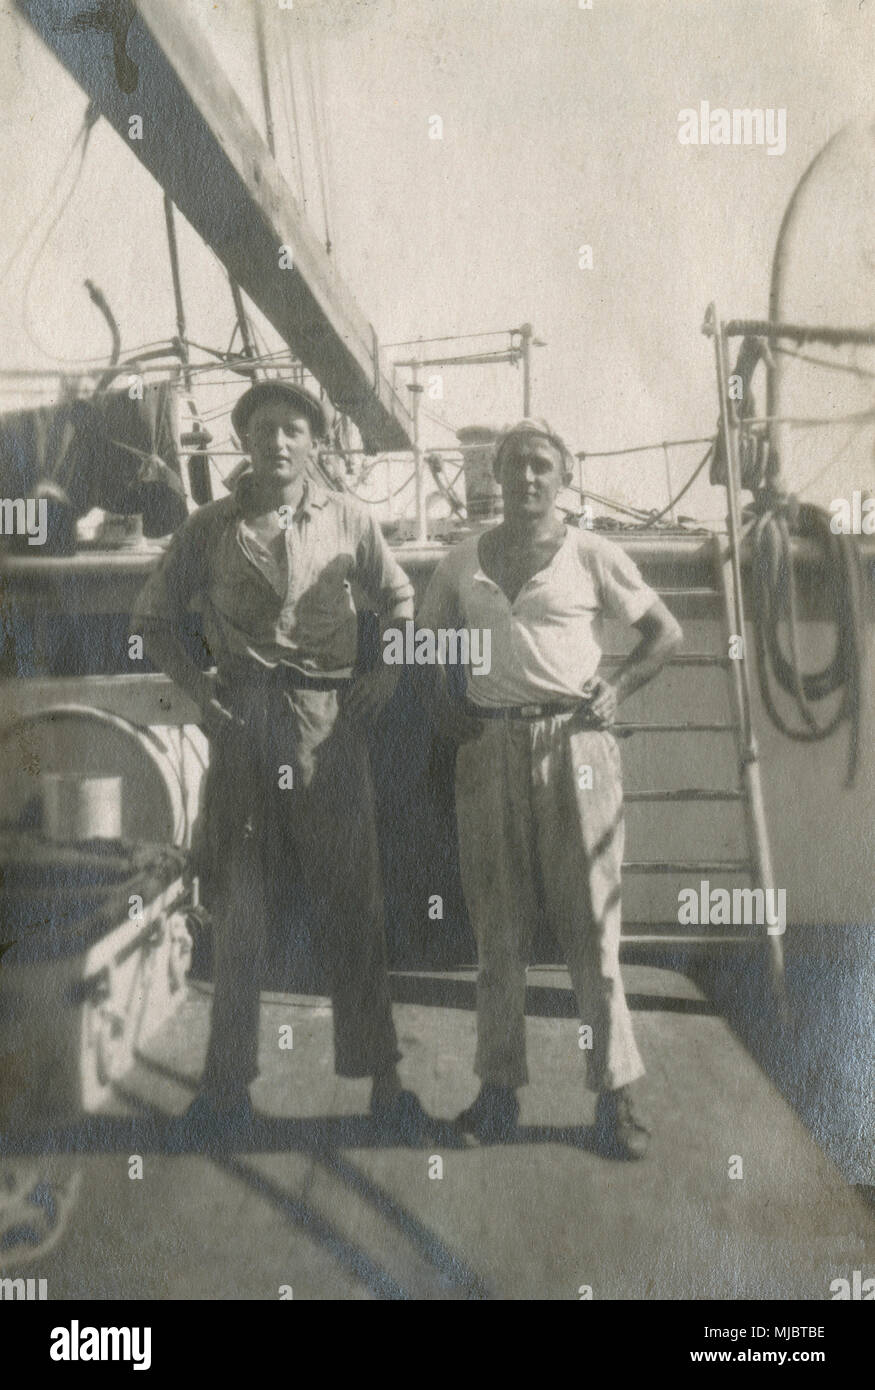 1900 Two Sailor Guys Make Out On Ship Deck Vintage Old Photos 4” x 6” Reprint